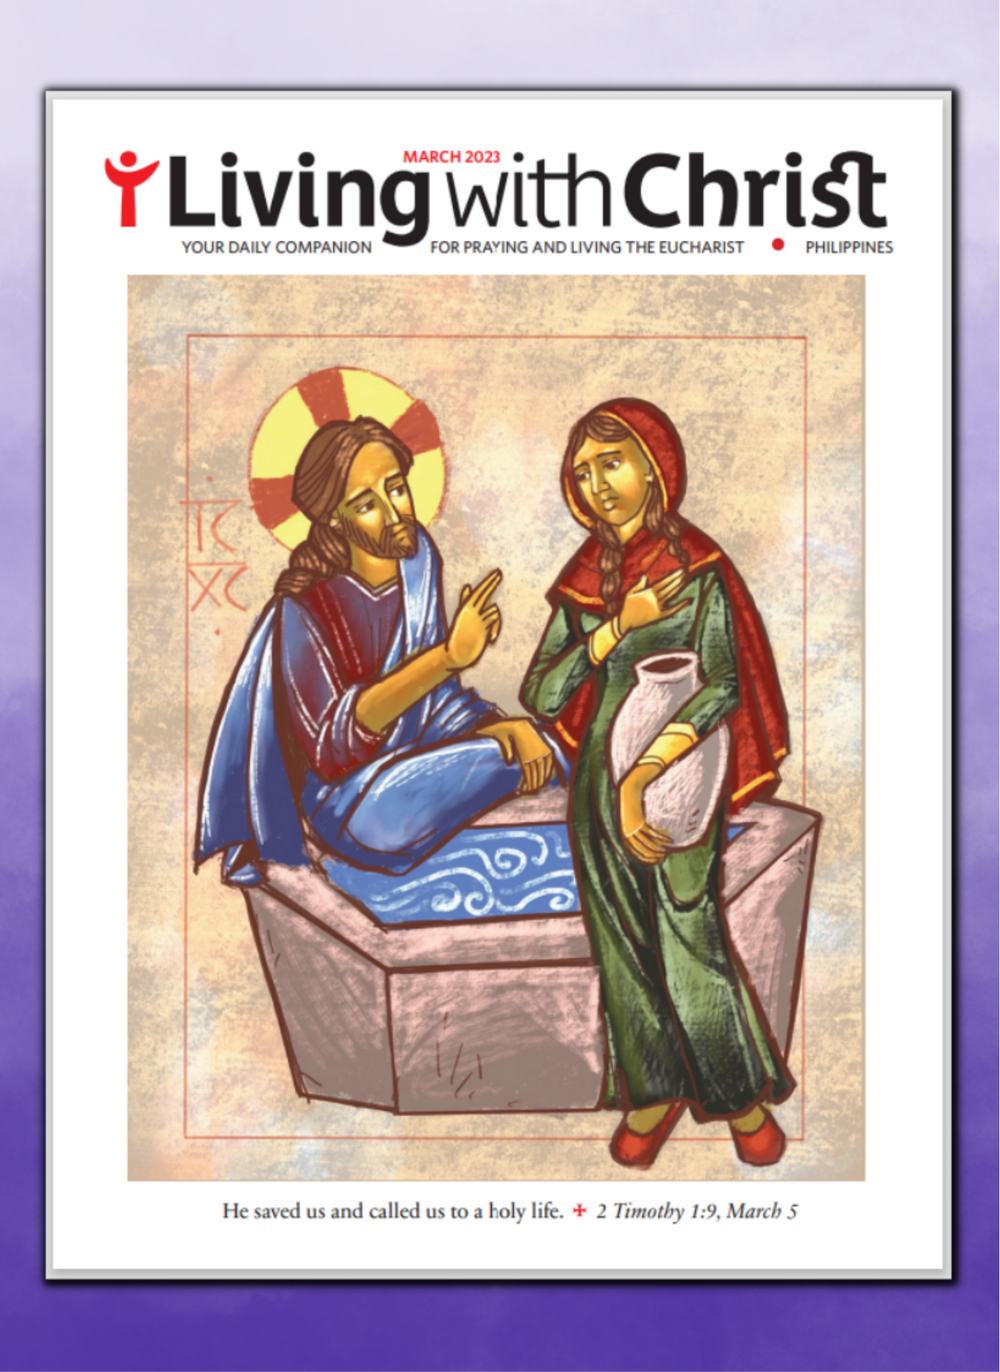 Living with Christ- MARCH ISSUE 2023